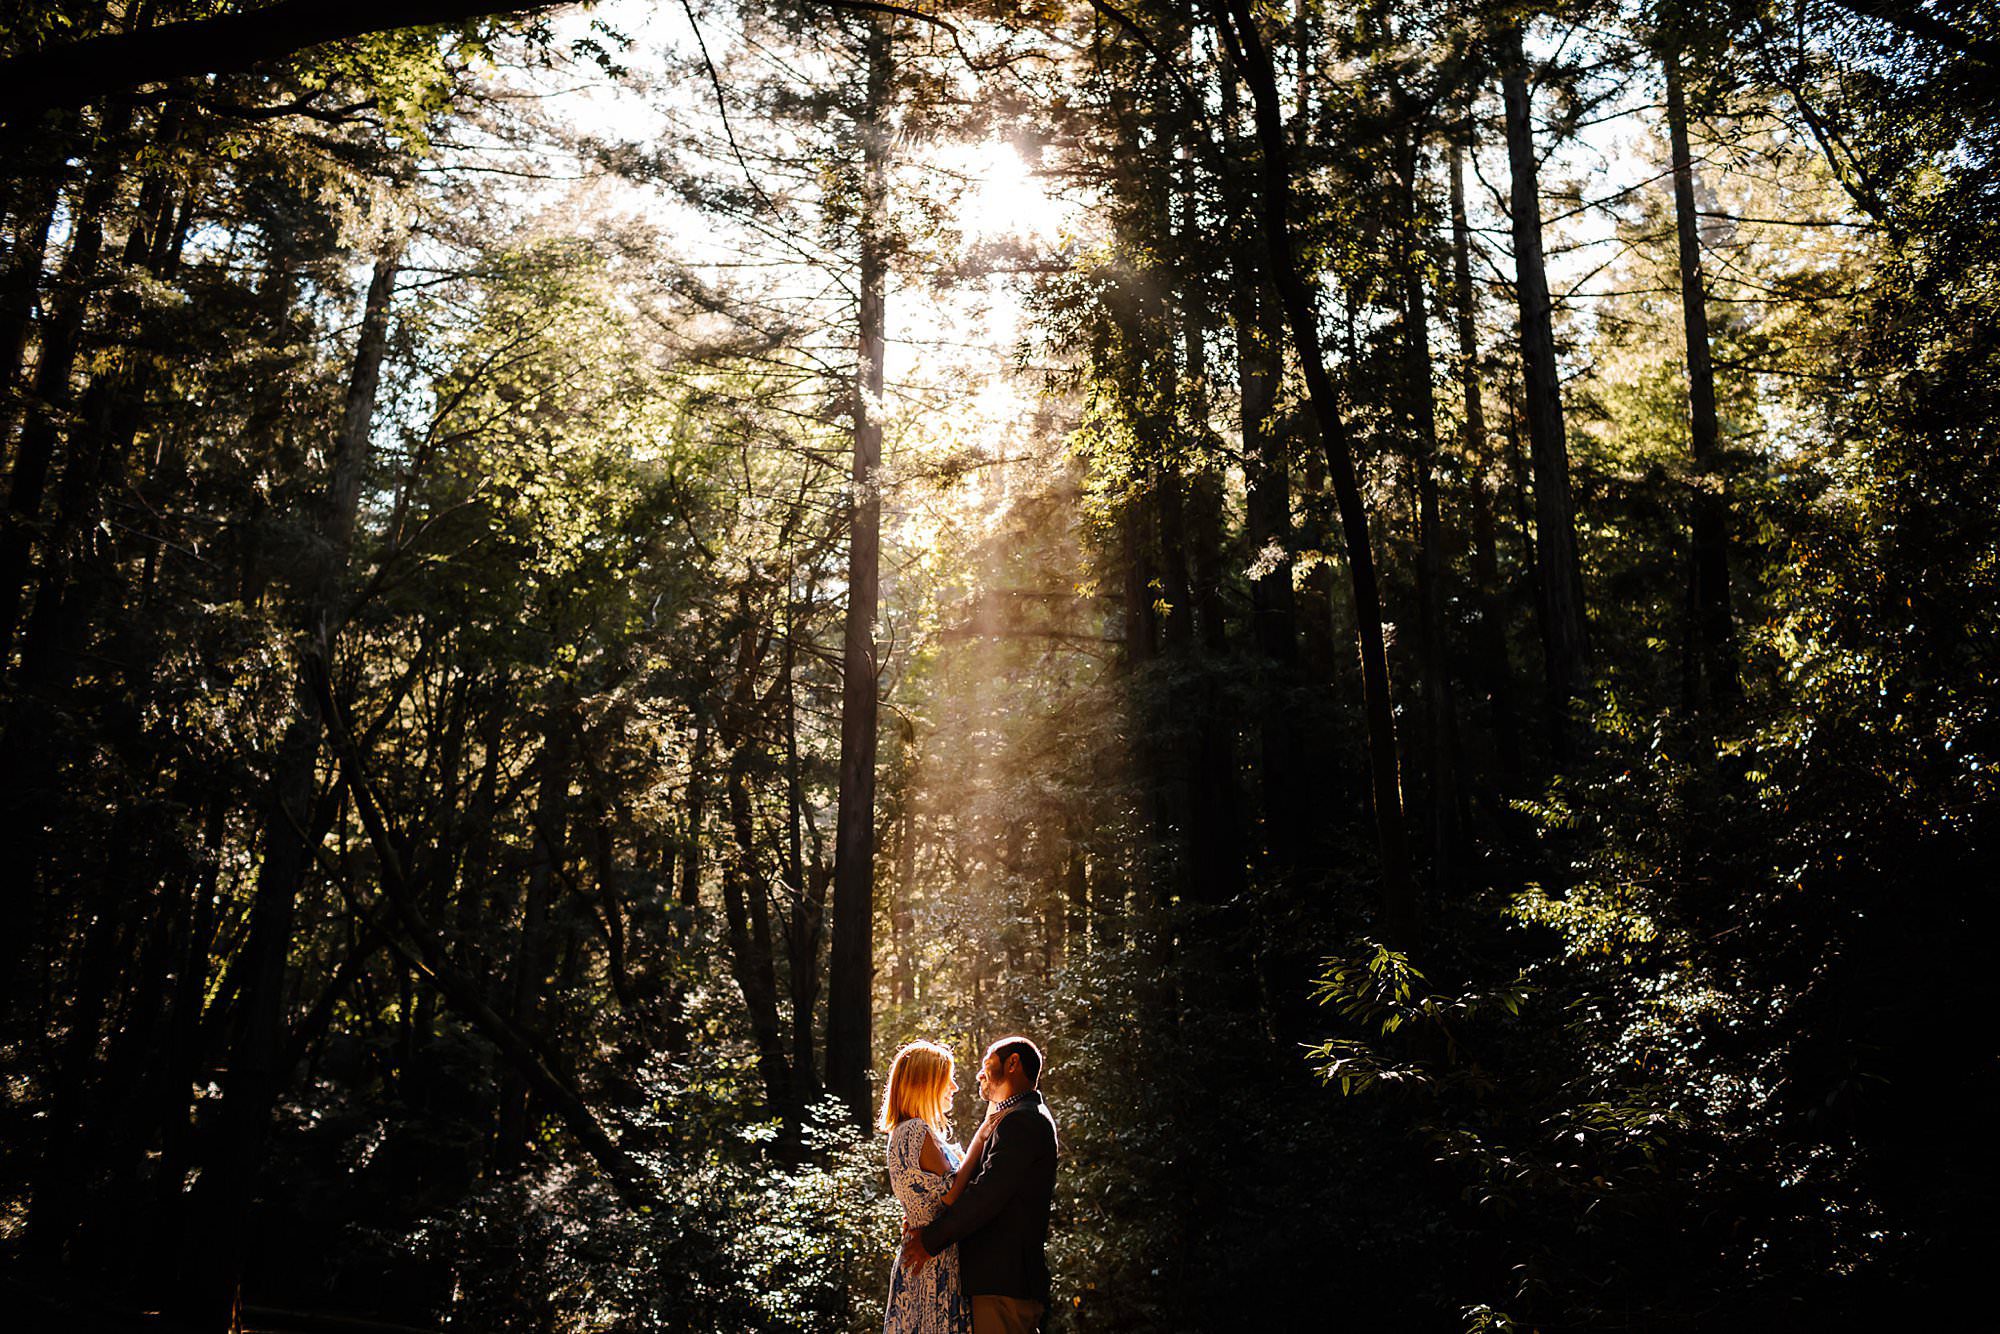 Engaged couple embracing closely on a trail in a beam of sunlight shining through the redwoods in Larkspur